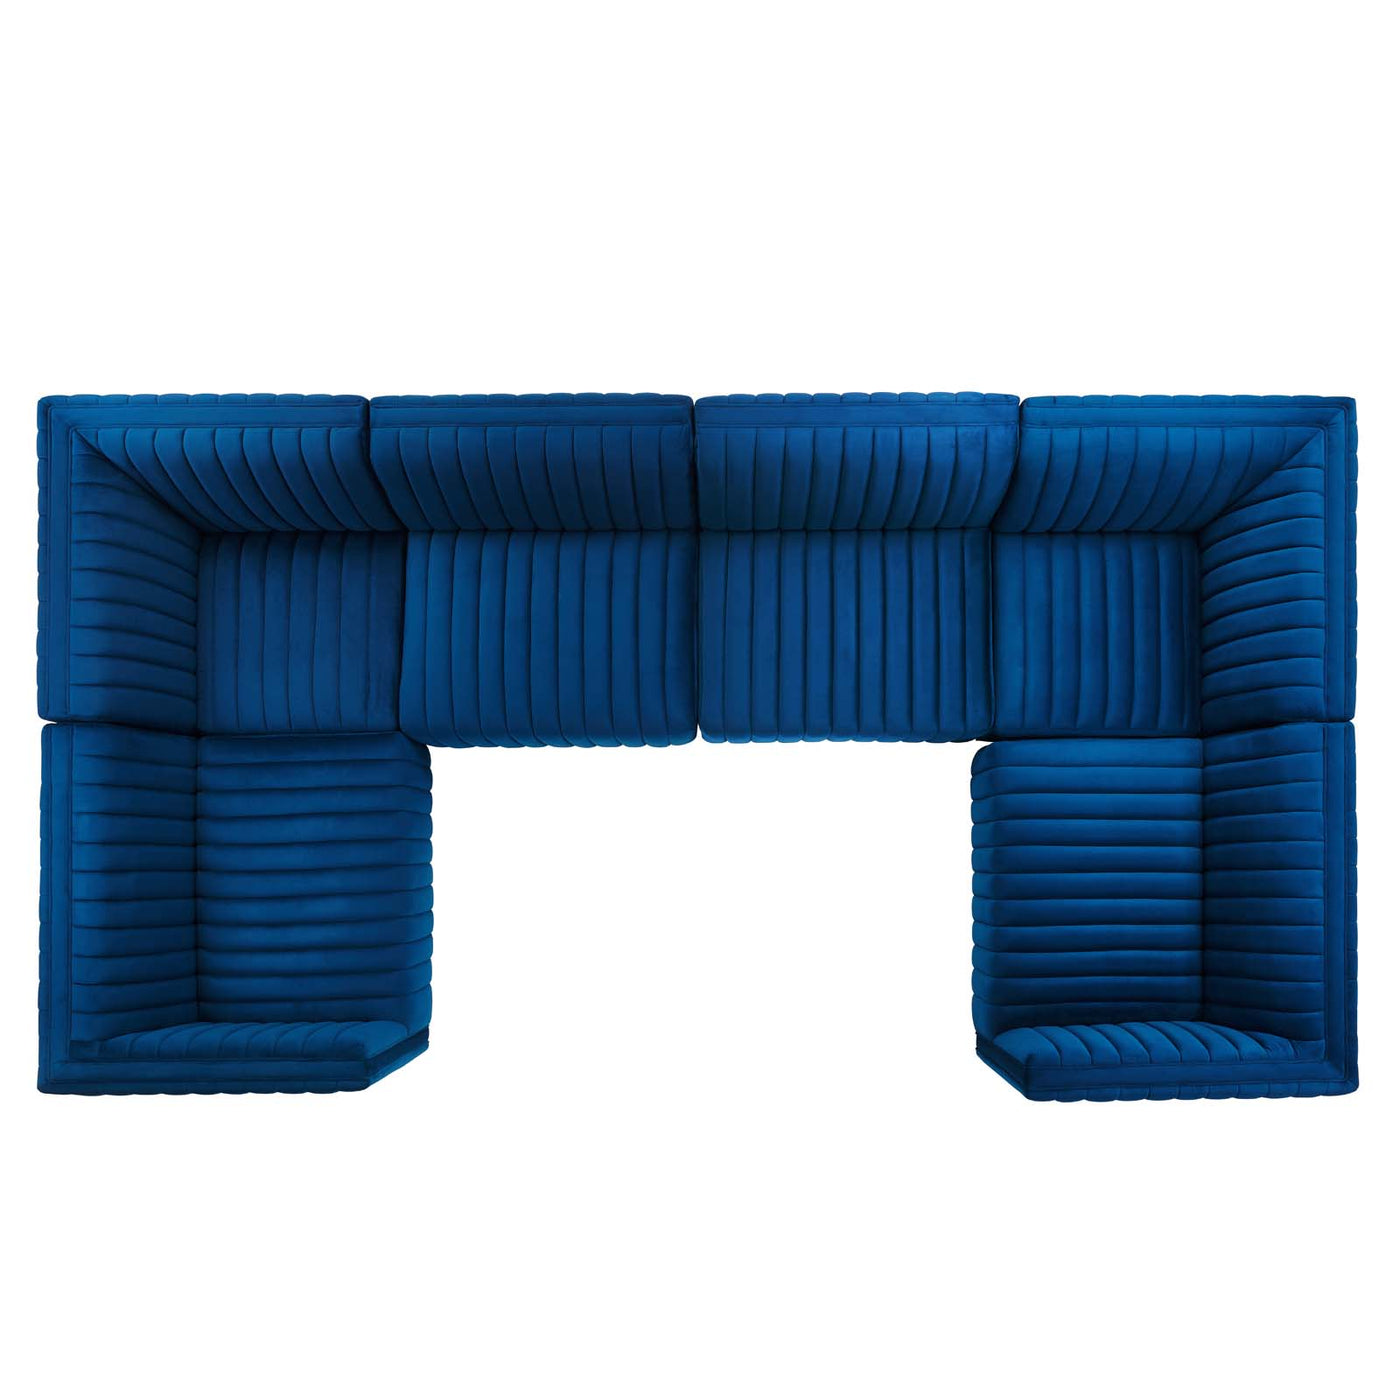 Conjure Channel Tufted Performance Velvet 6-Piece U-Shaped Sectional